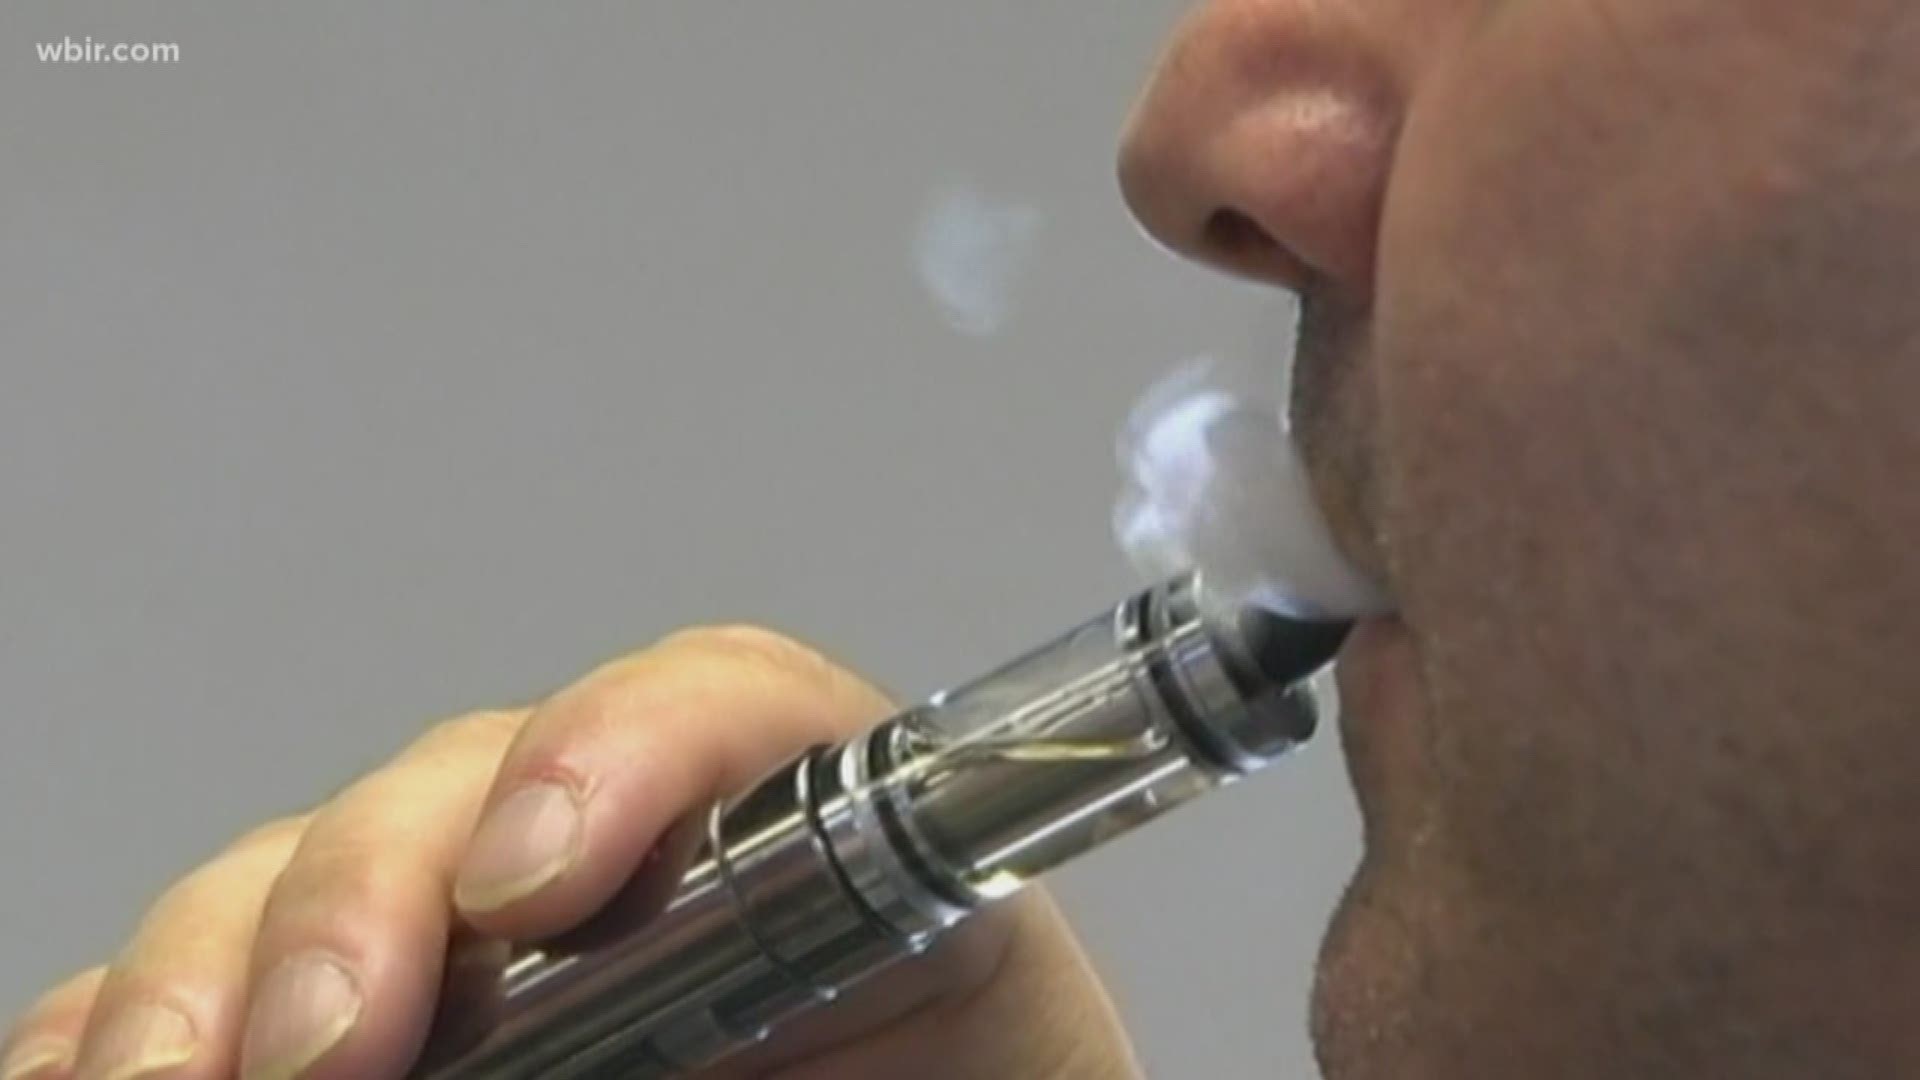 An East Tennessee woman is warning others about the dangers of e-cigarette usage after she says using the device made her sick for months.